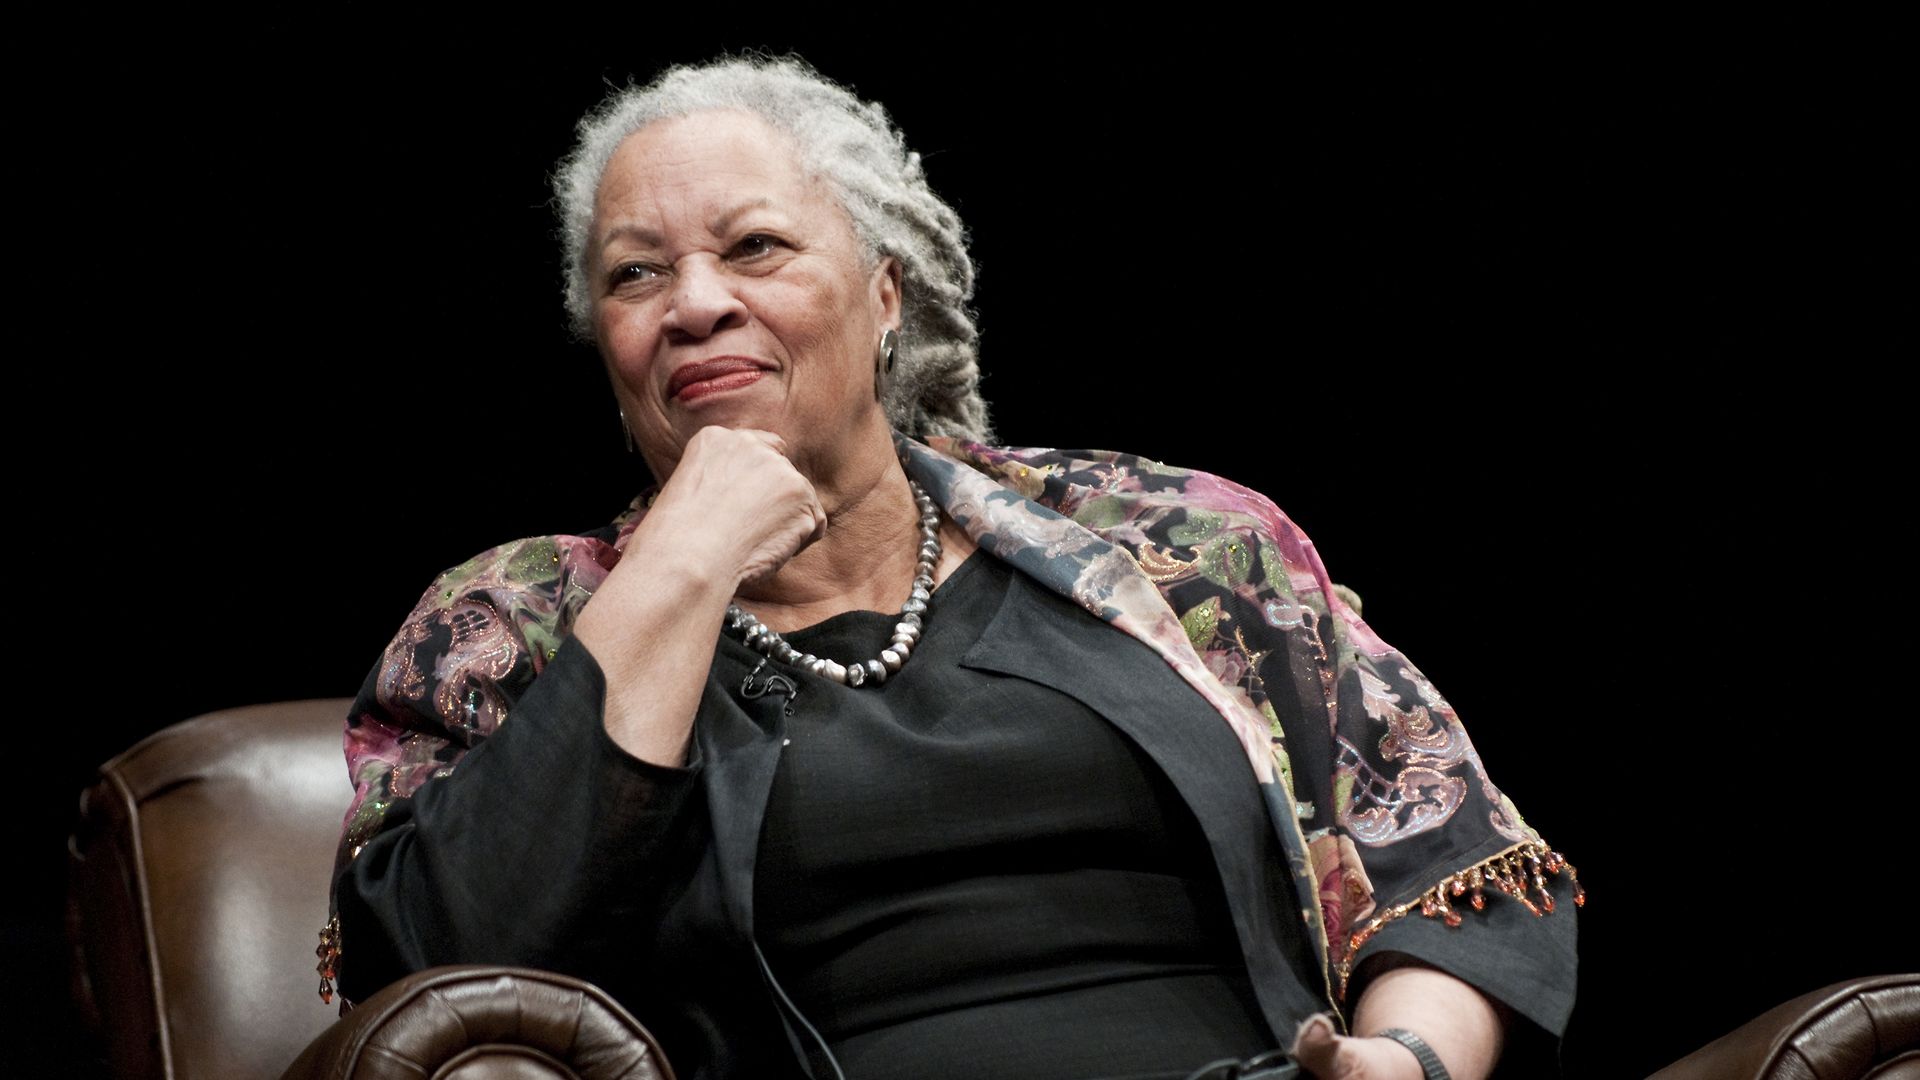 Author Toni Morrison sits with her chin resting on her closed fist